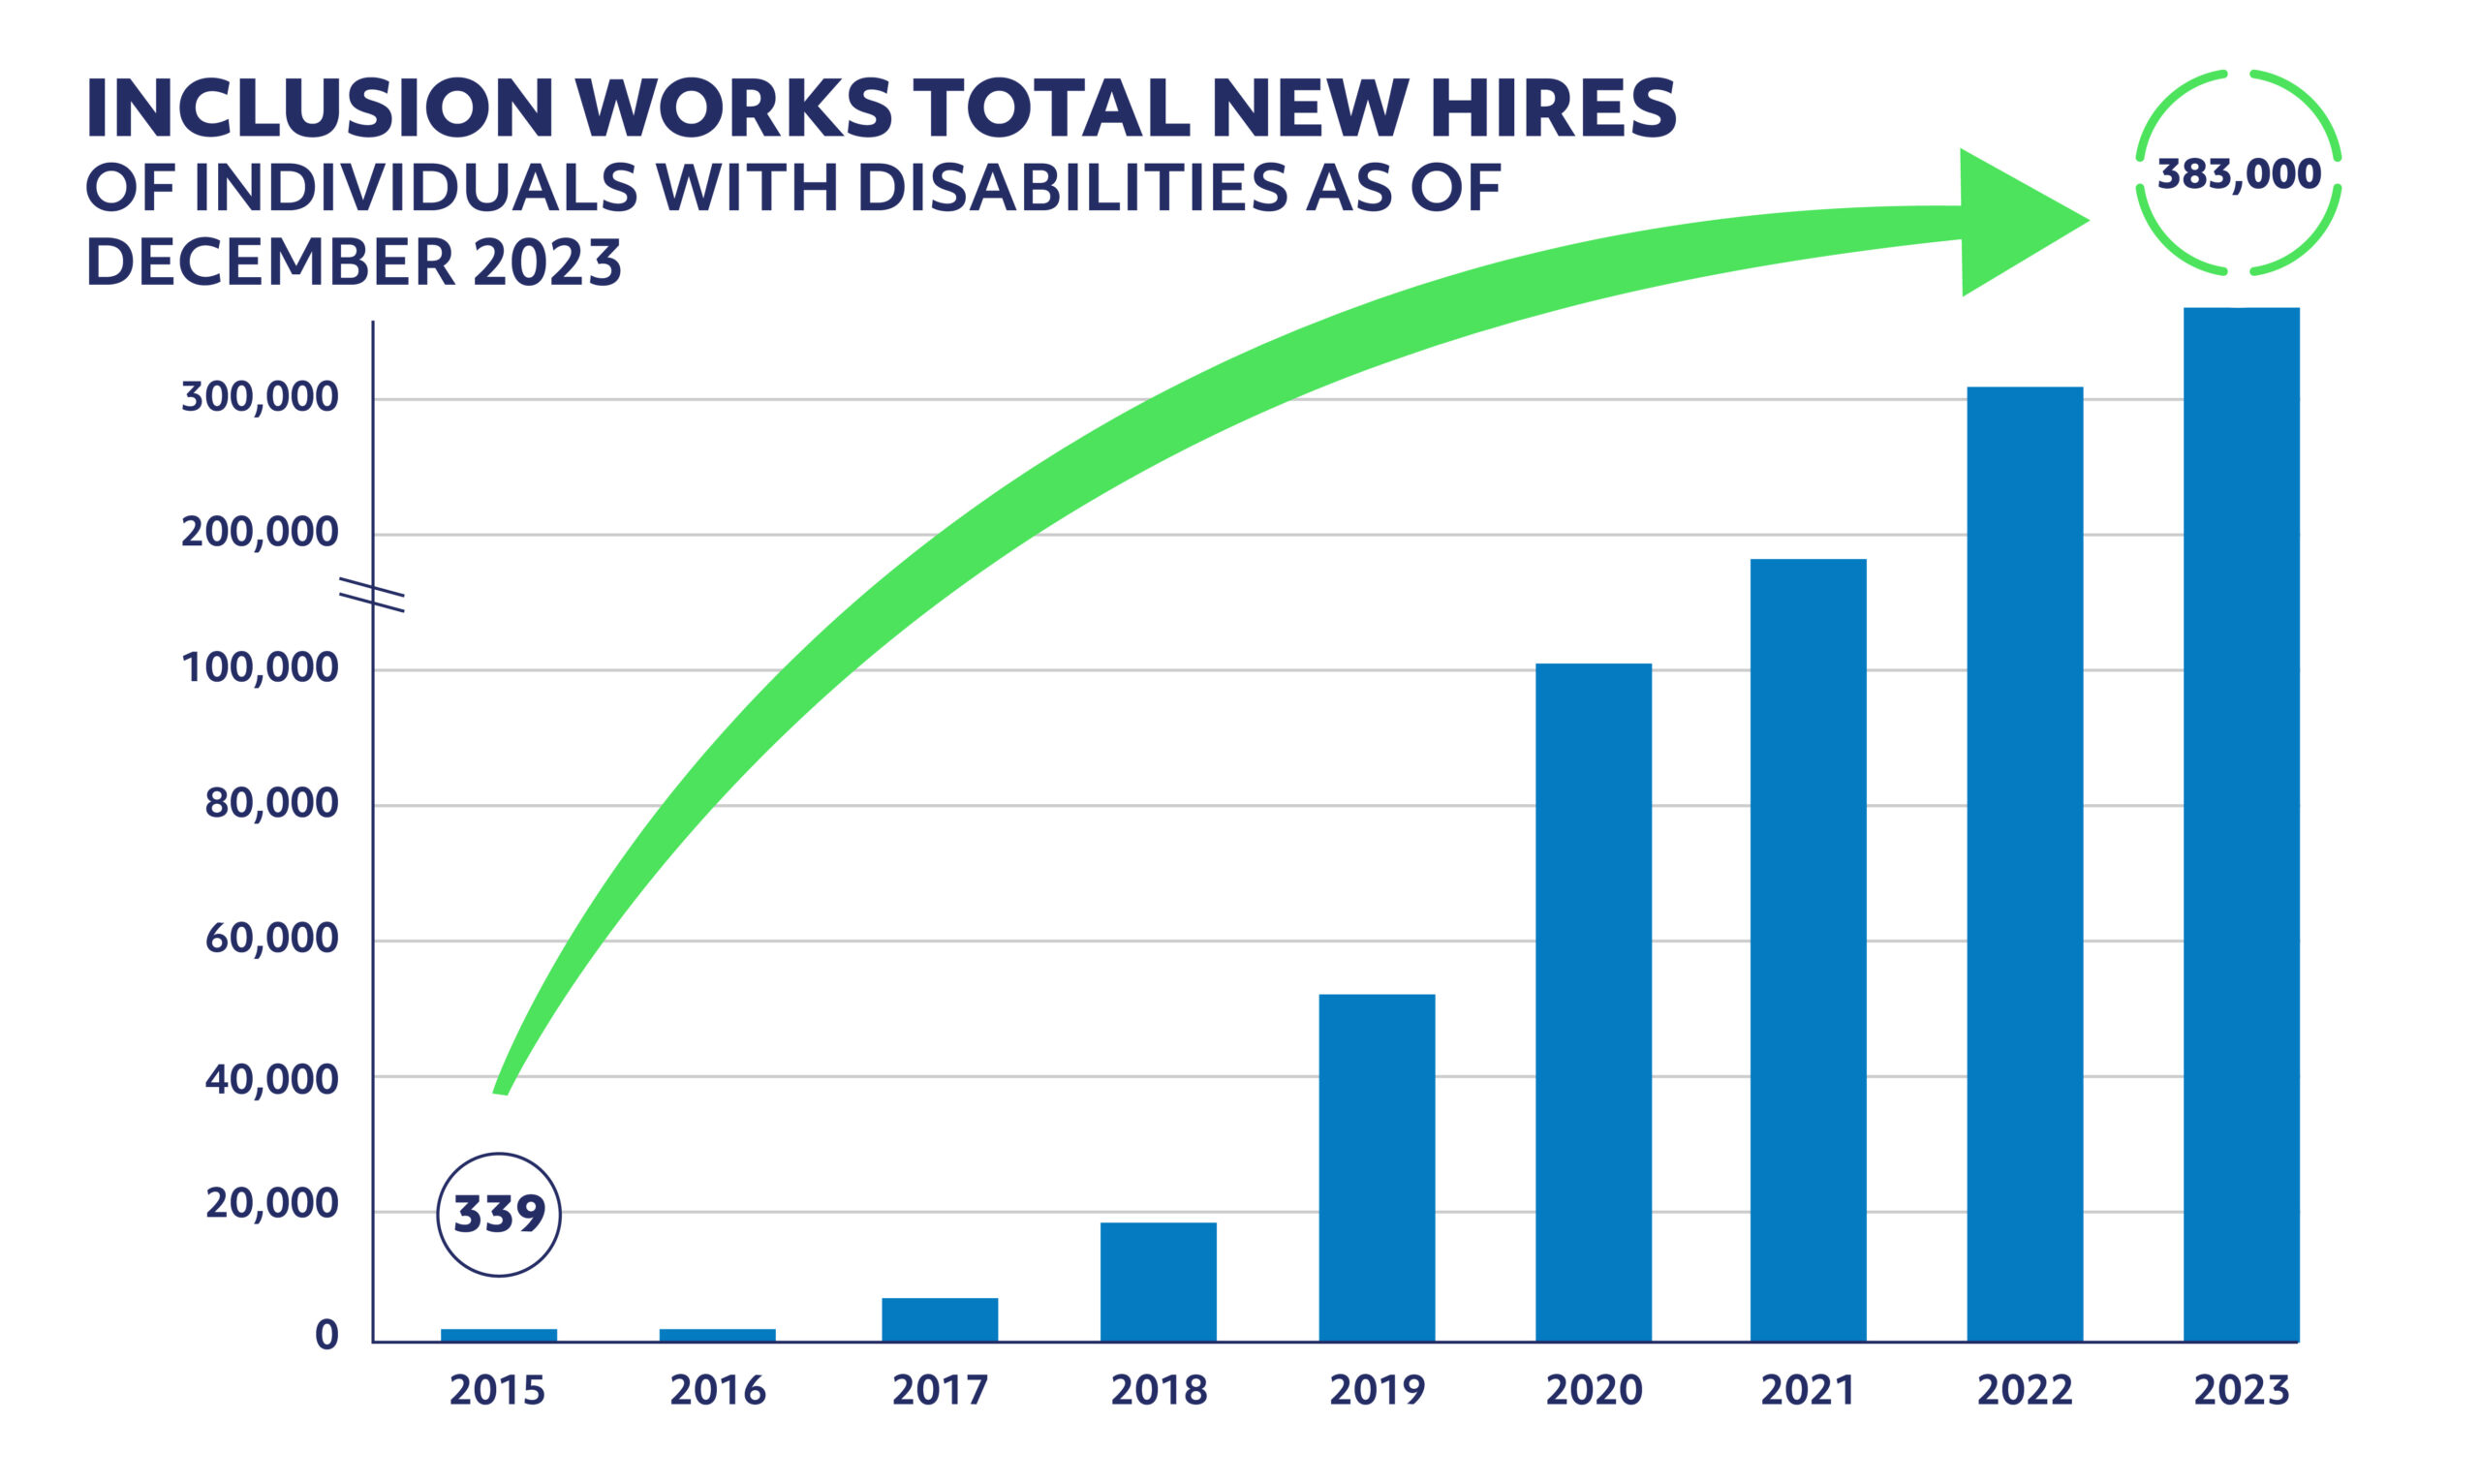 Bar graph of Inclusion Works Total New Hires ofBar graph of Inclusion Works Total New Hires of Individuals with Disabilities as of December 2023, from 339 in 2015 to 383,000 in 2023.